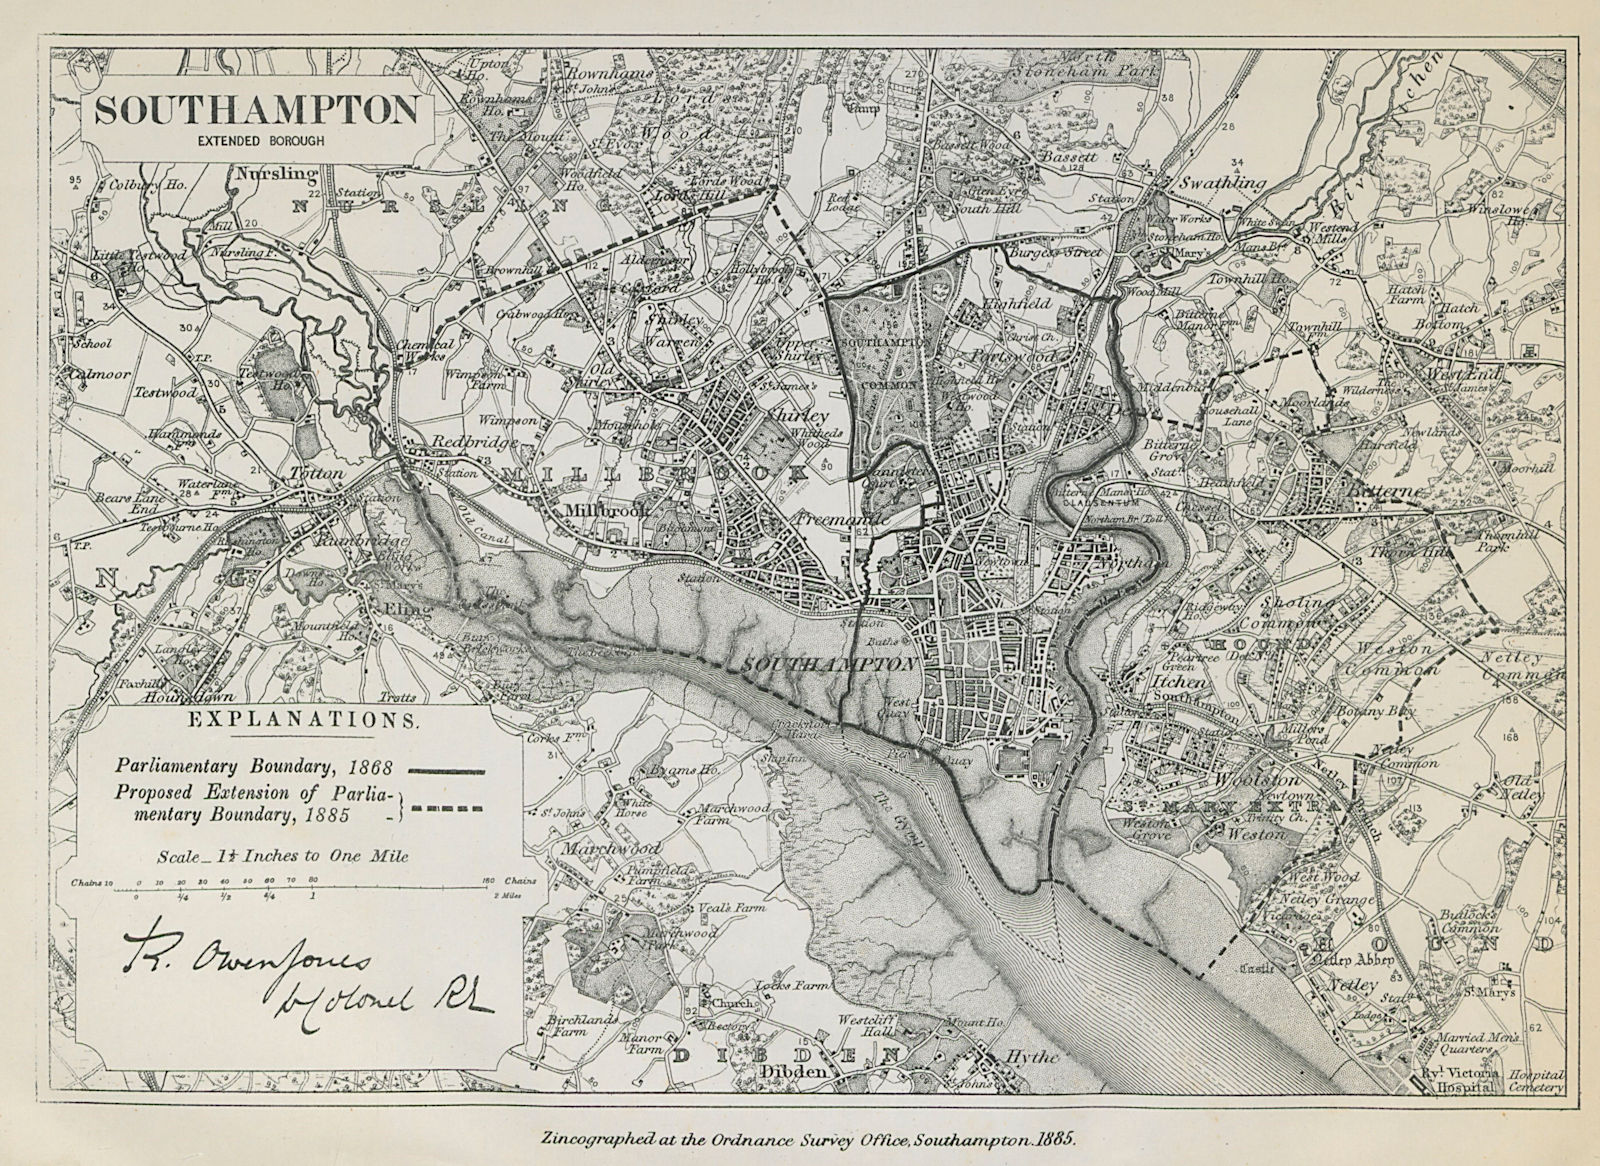 Southampton Parliamentary Borough. Millbrook. BOUNDARY COMMISSION 1885 old map